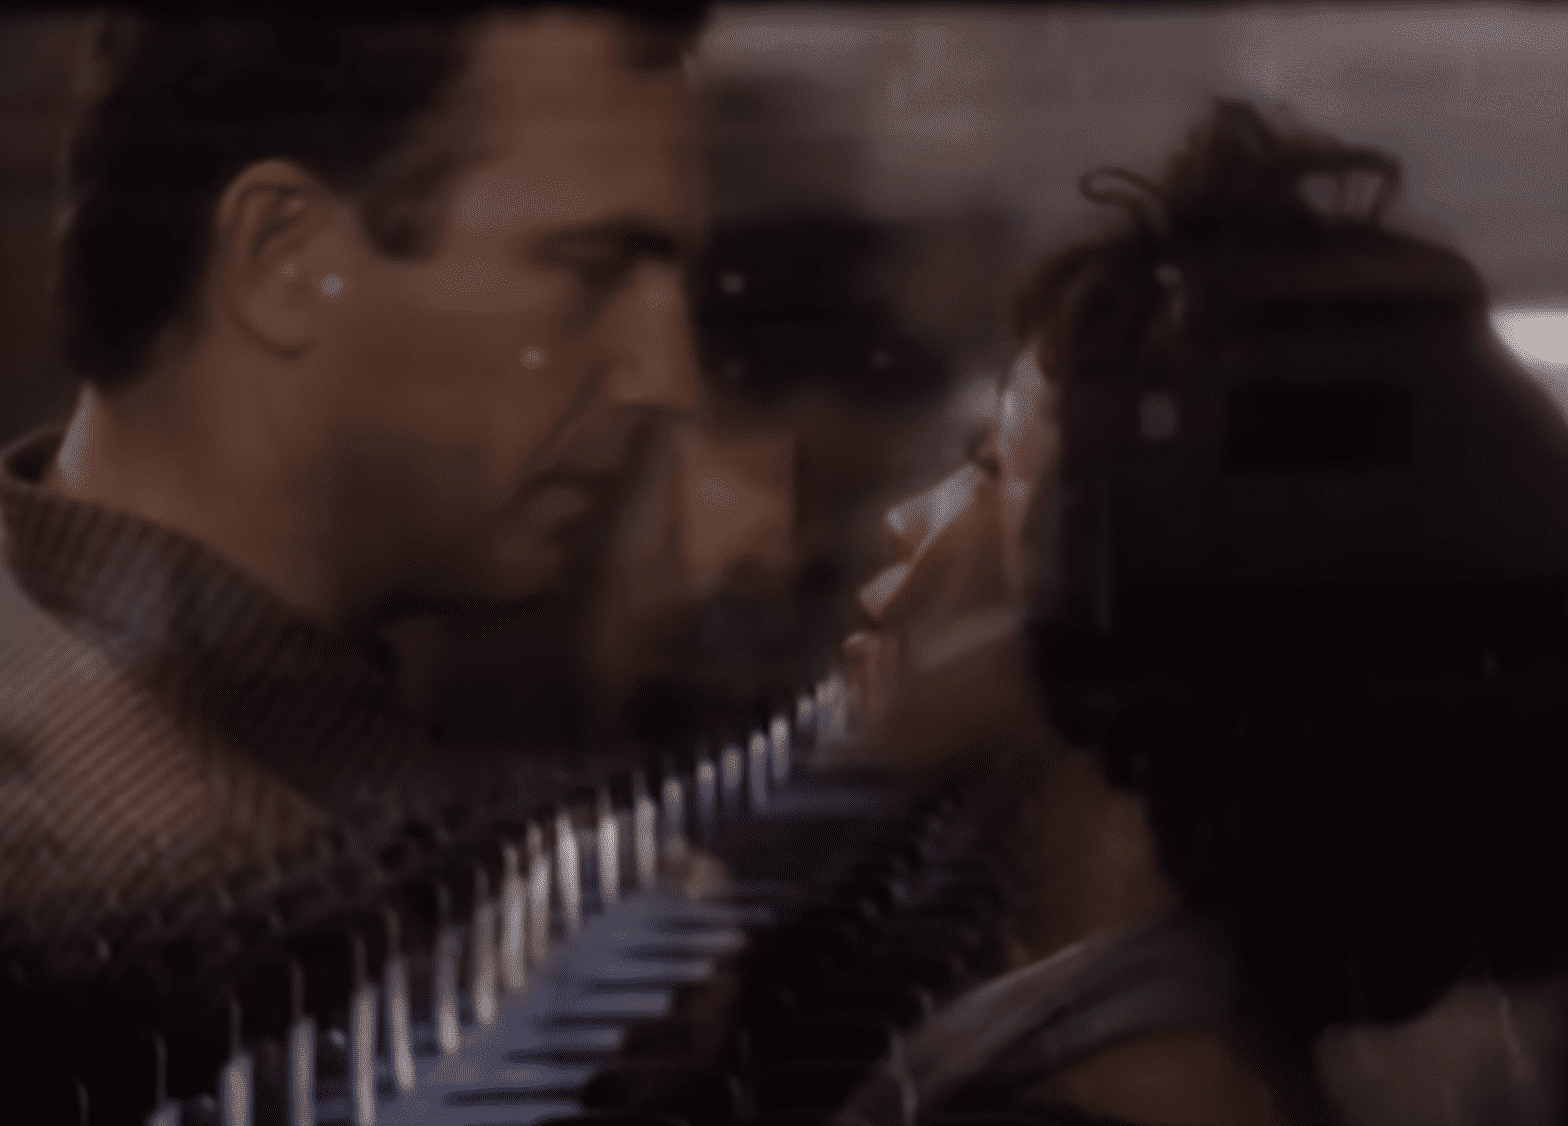 Costner and Whitney in the movie "The Bodyguard". | Source: YouTube/WhitneyHuston